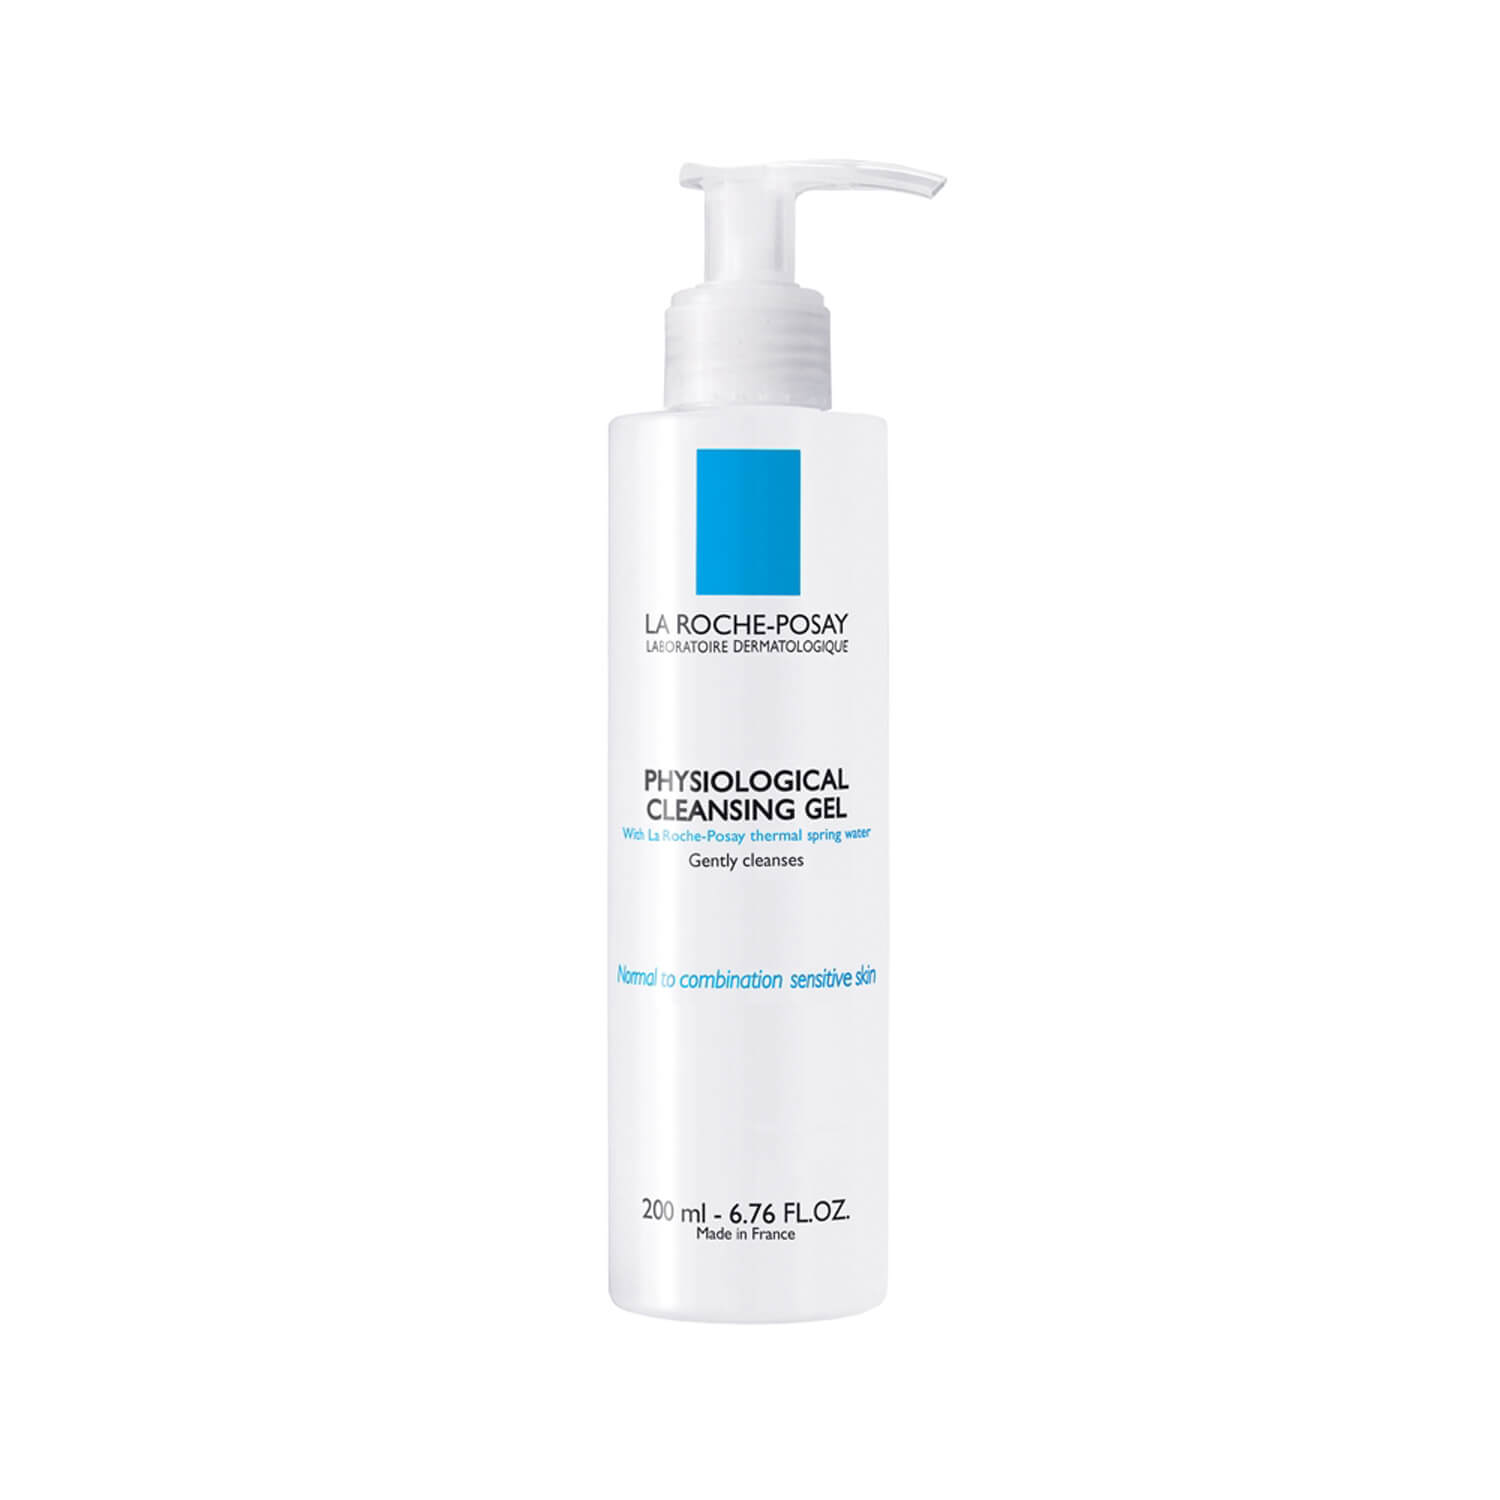 La Roche-Posay Physiological Cleansing Gel 200ml